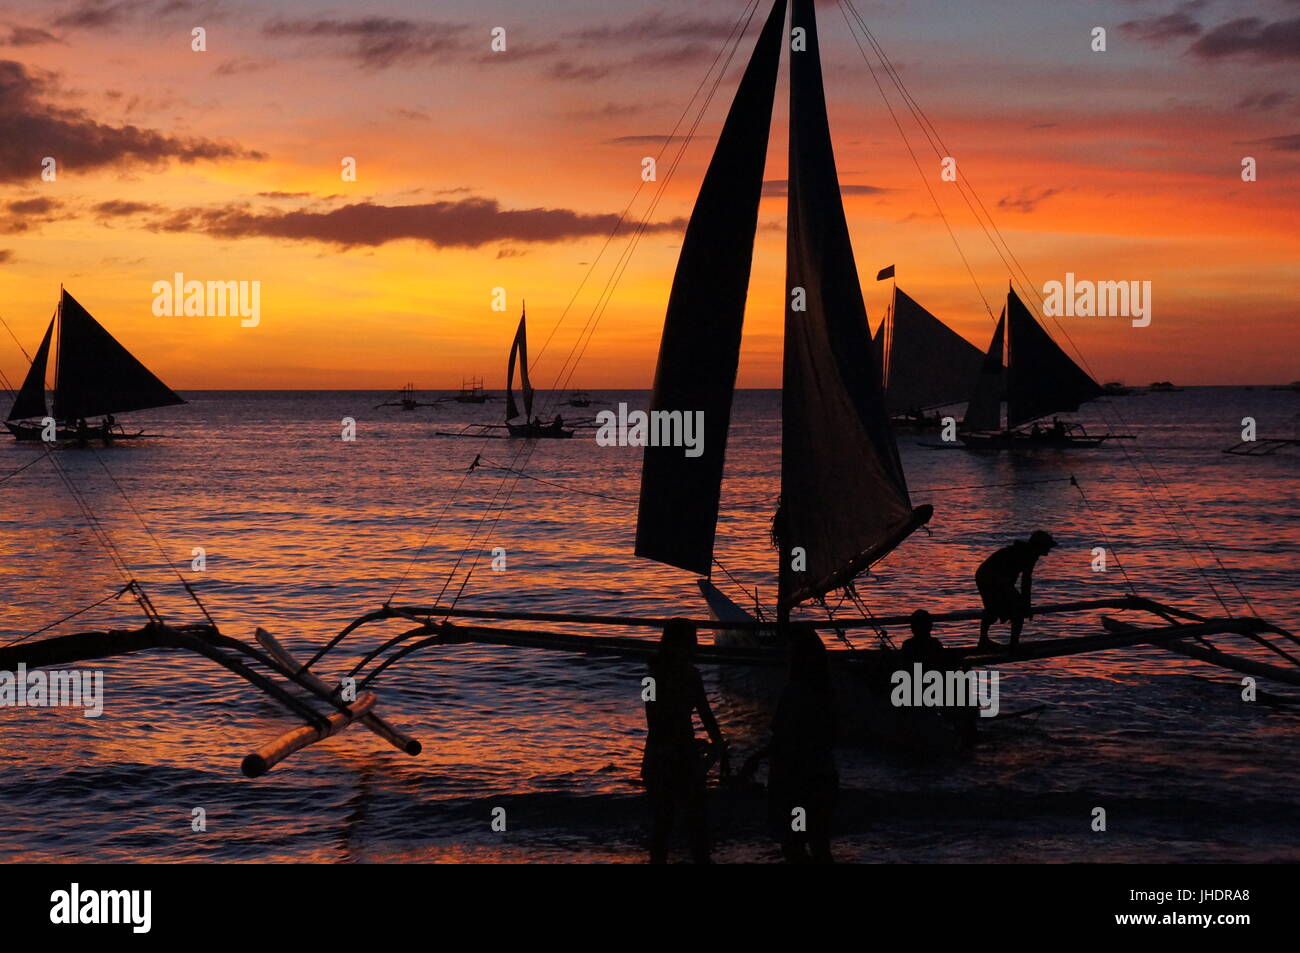 Stunning tourist board style photo. beach sunset view silhouette of sailing boats background, with man standing on outriggers.  Boracay Philippines . Stock Photo